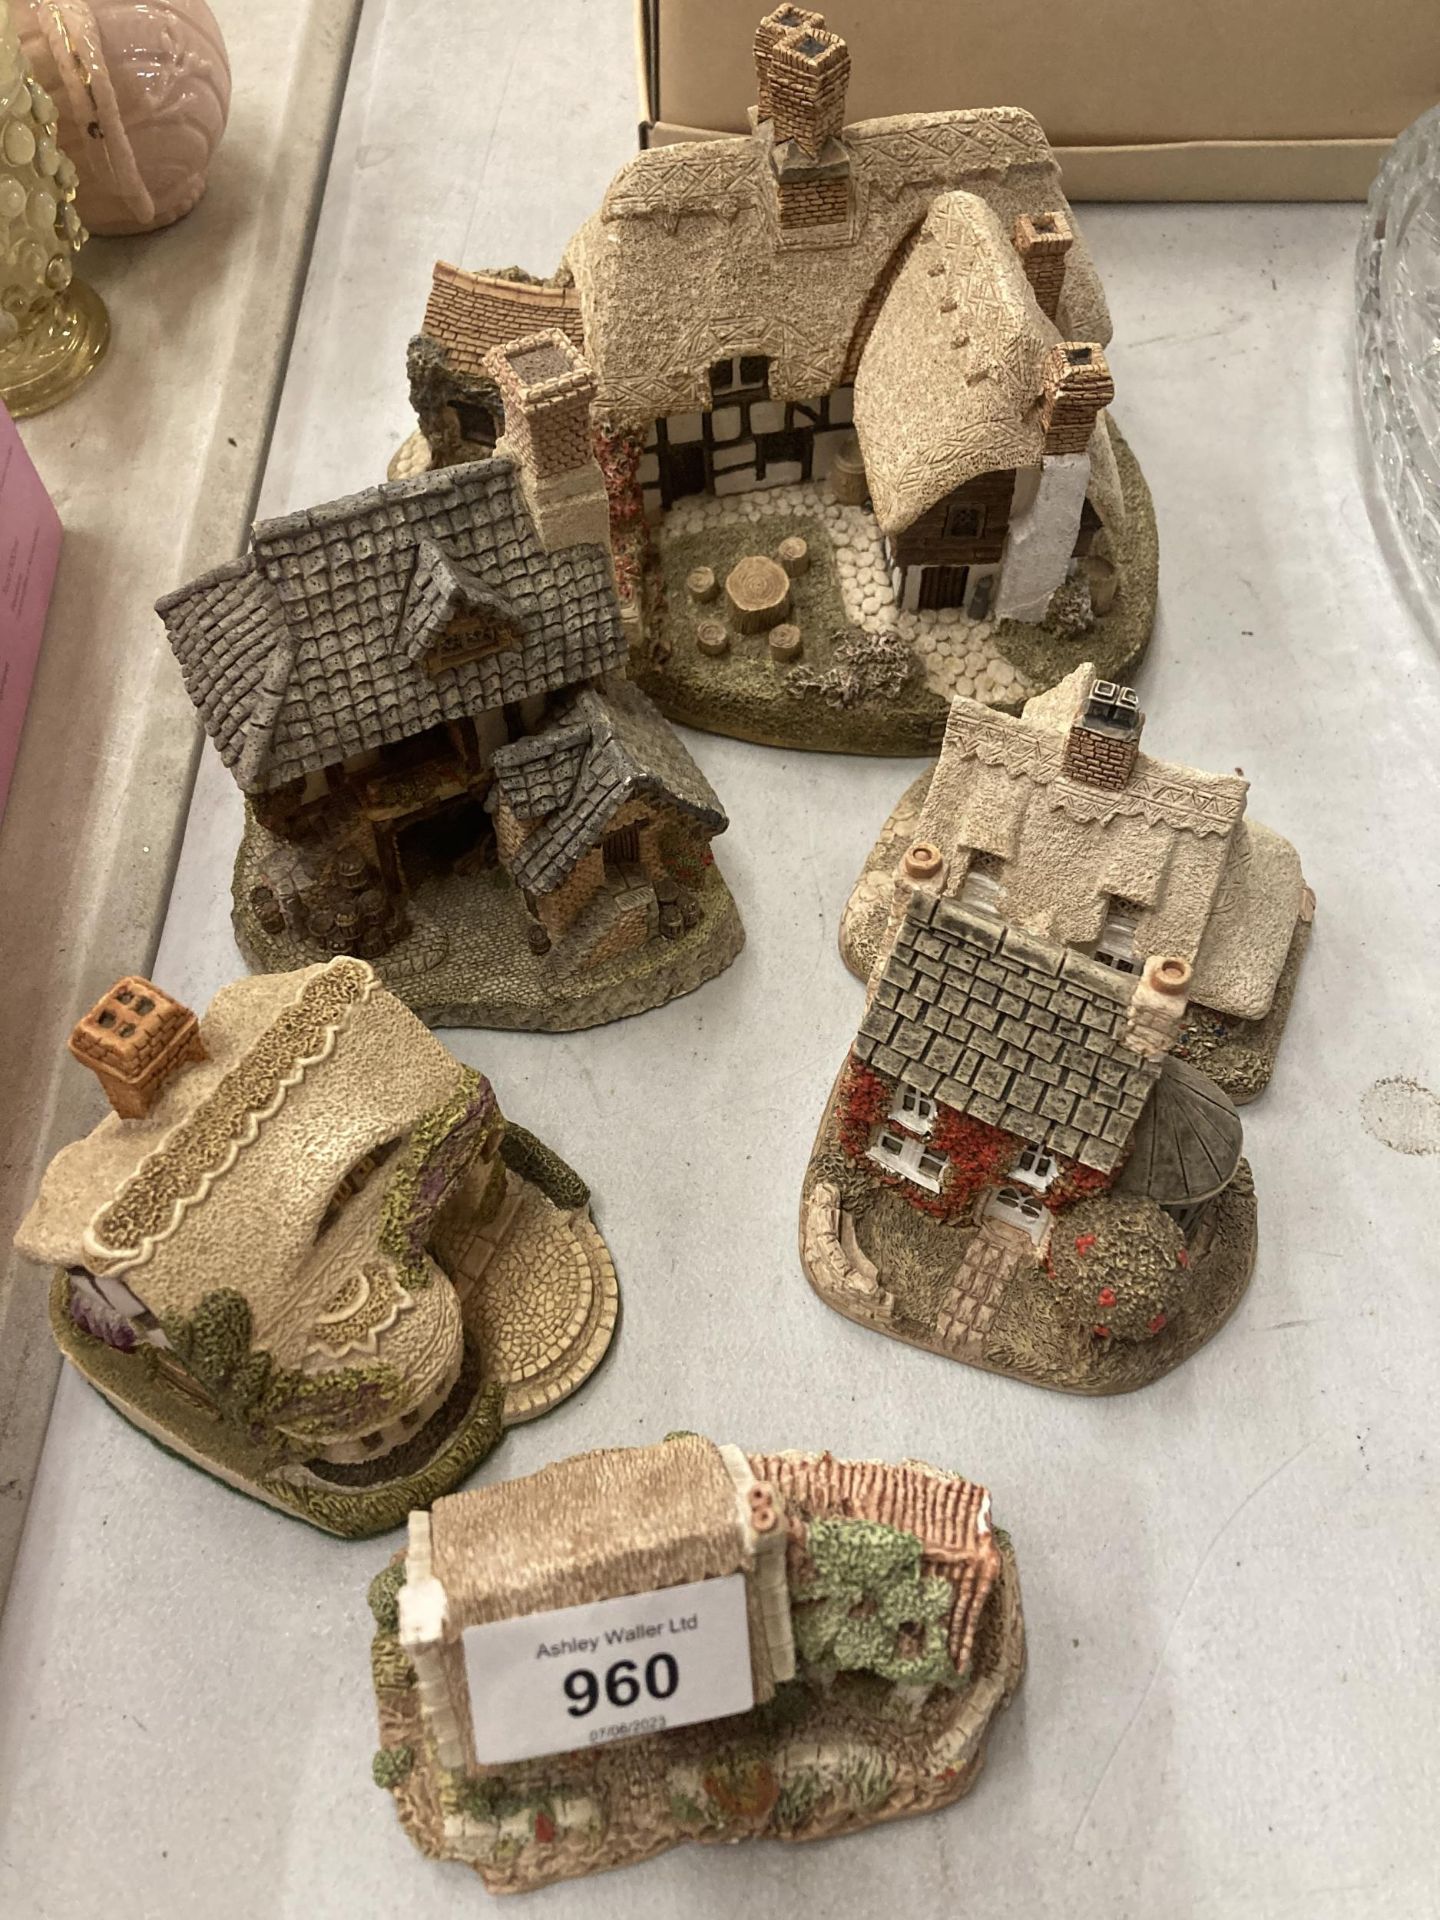 A QYUANTITY OF LILLIPUT LANE COTTAGES TO INCLUDE 'THATCHERS REST' - 6 IN TOTAL